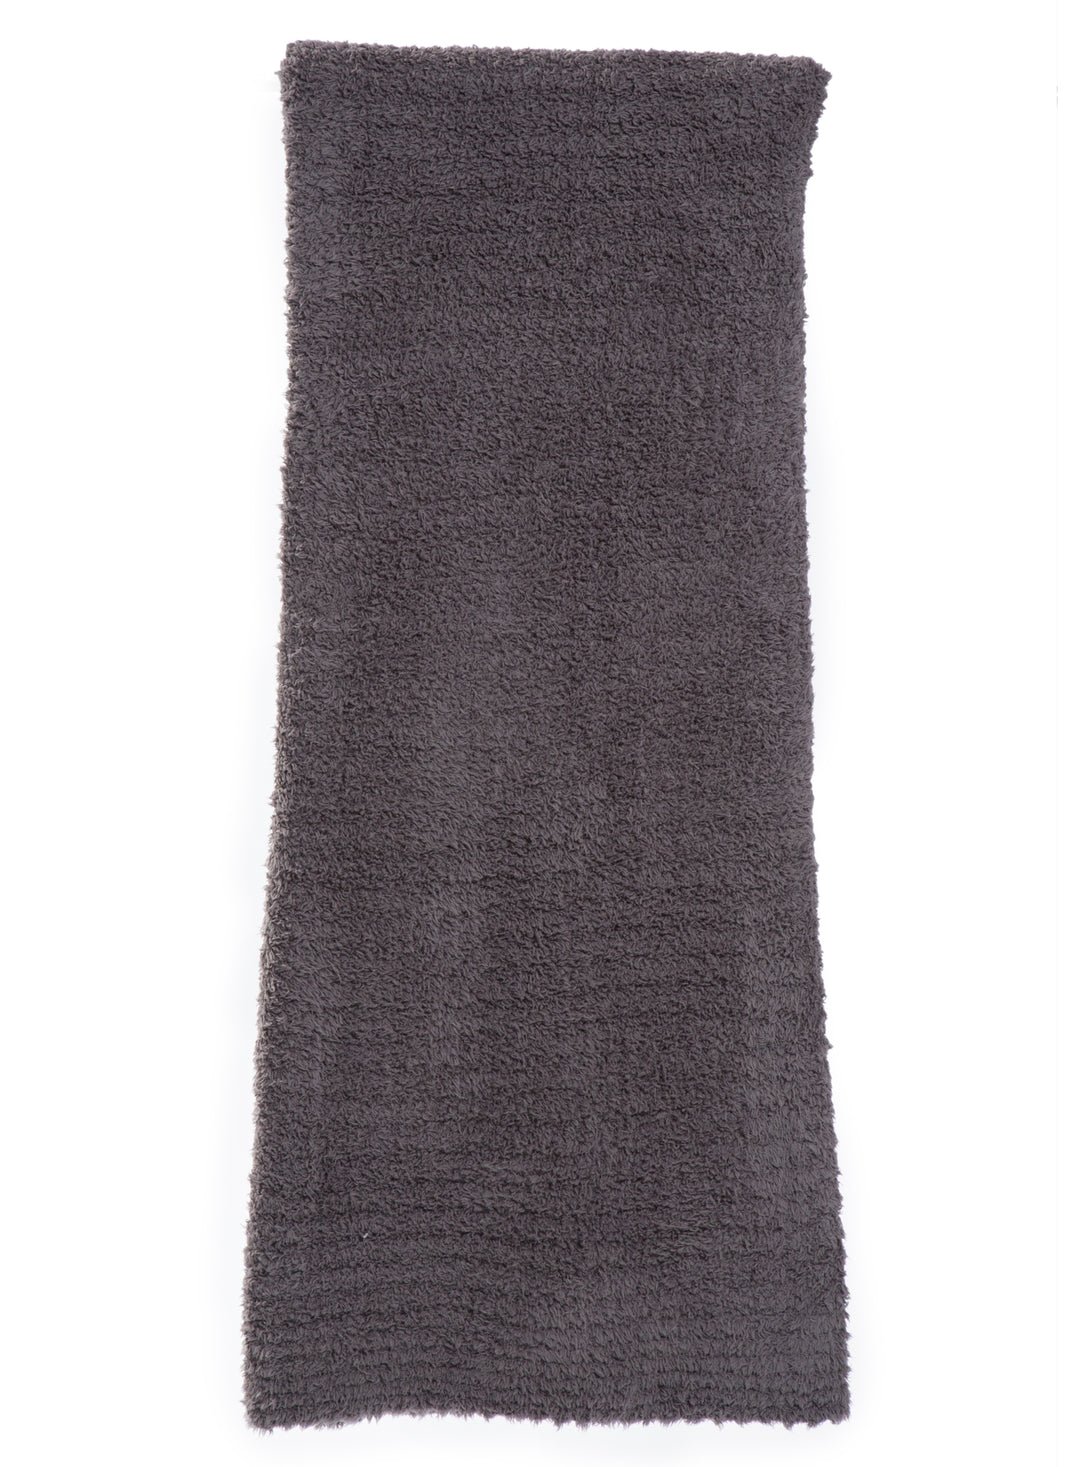 Barefoot Dreams - CozyChic Ribbed Throw in Charcoal